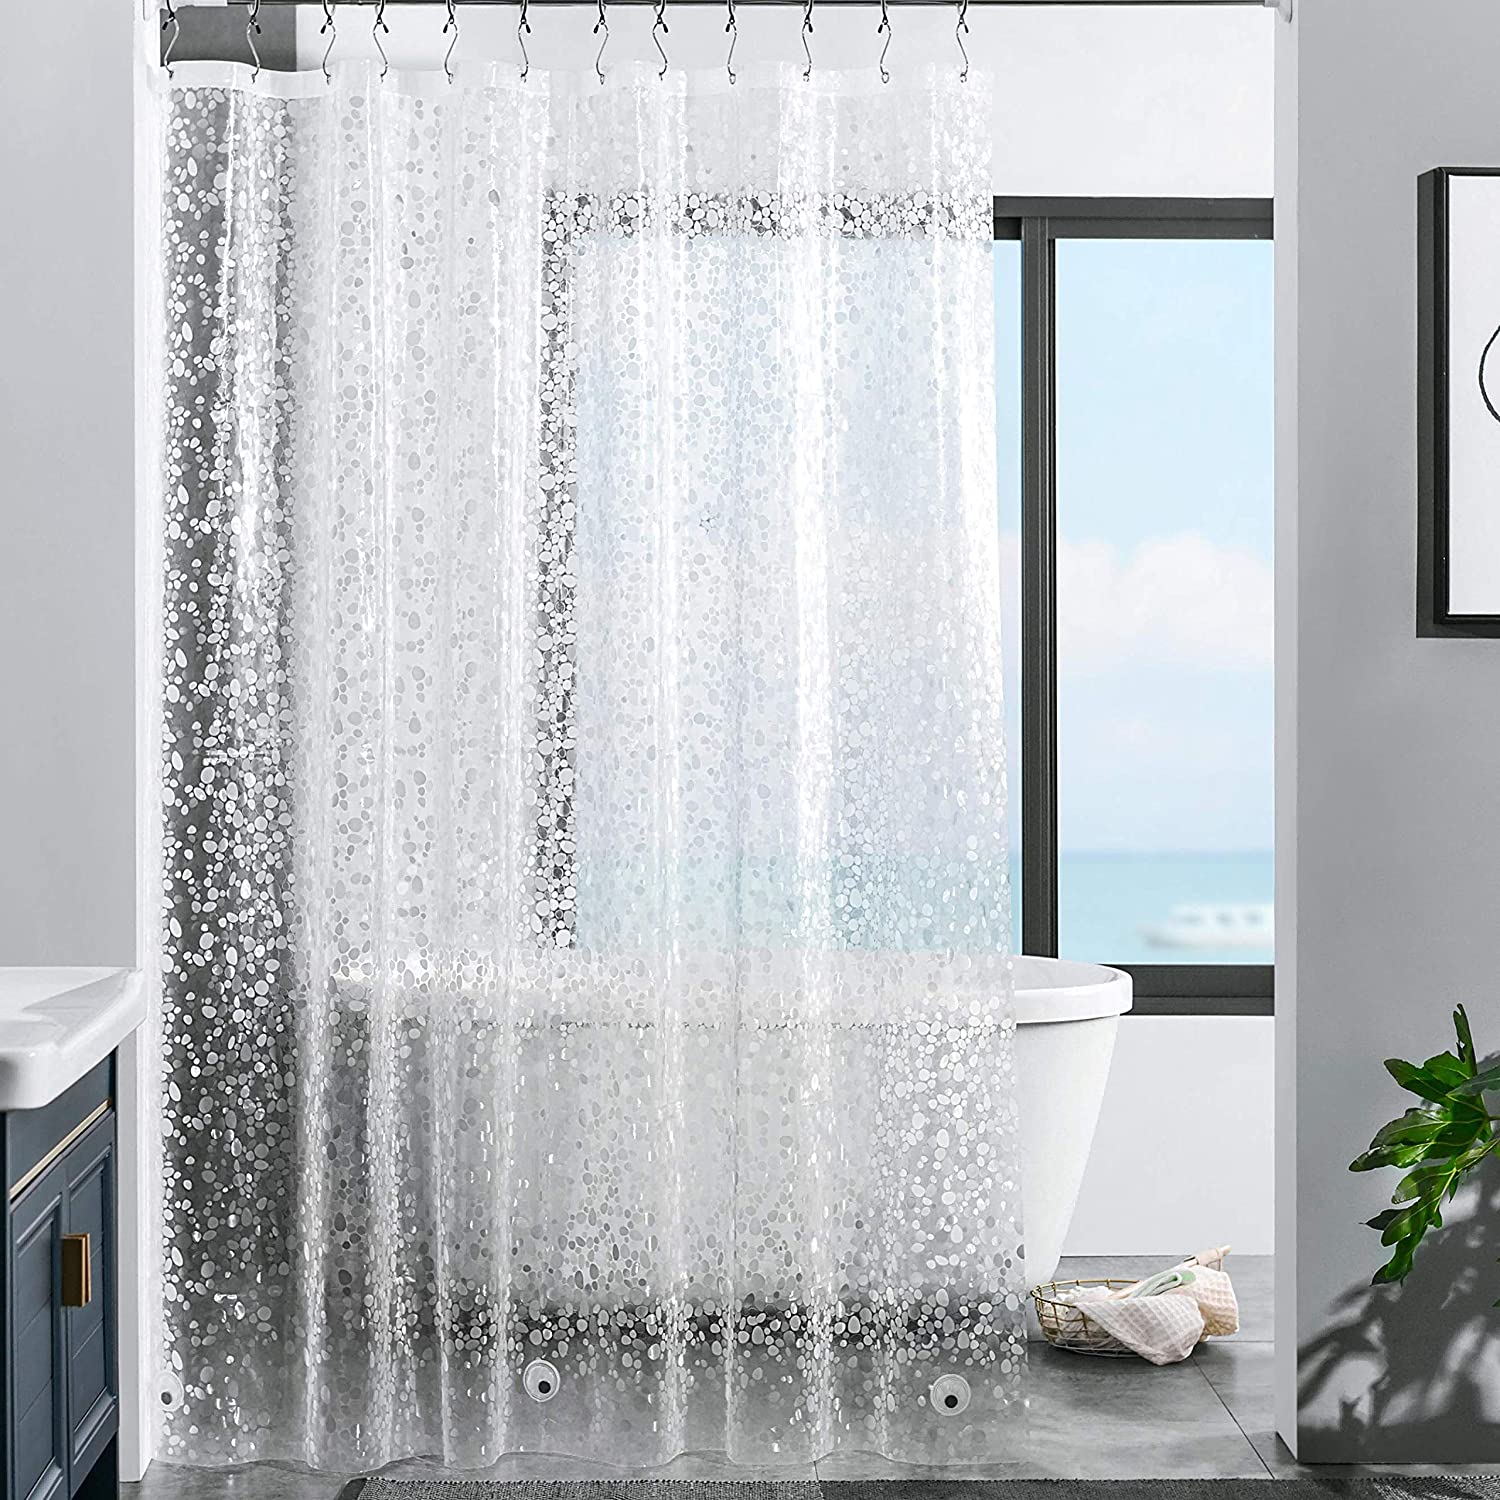 Details about   LOVTEX PEVA Shower Curtain Liner 72x72 Light Weight 3G Clear Liner Water Repel 